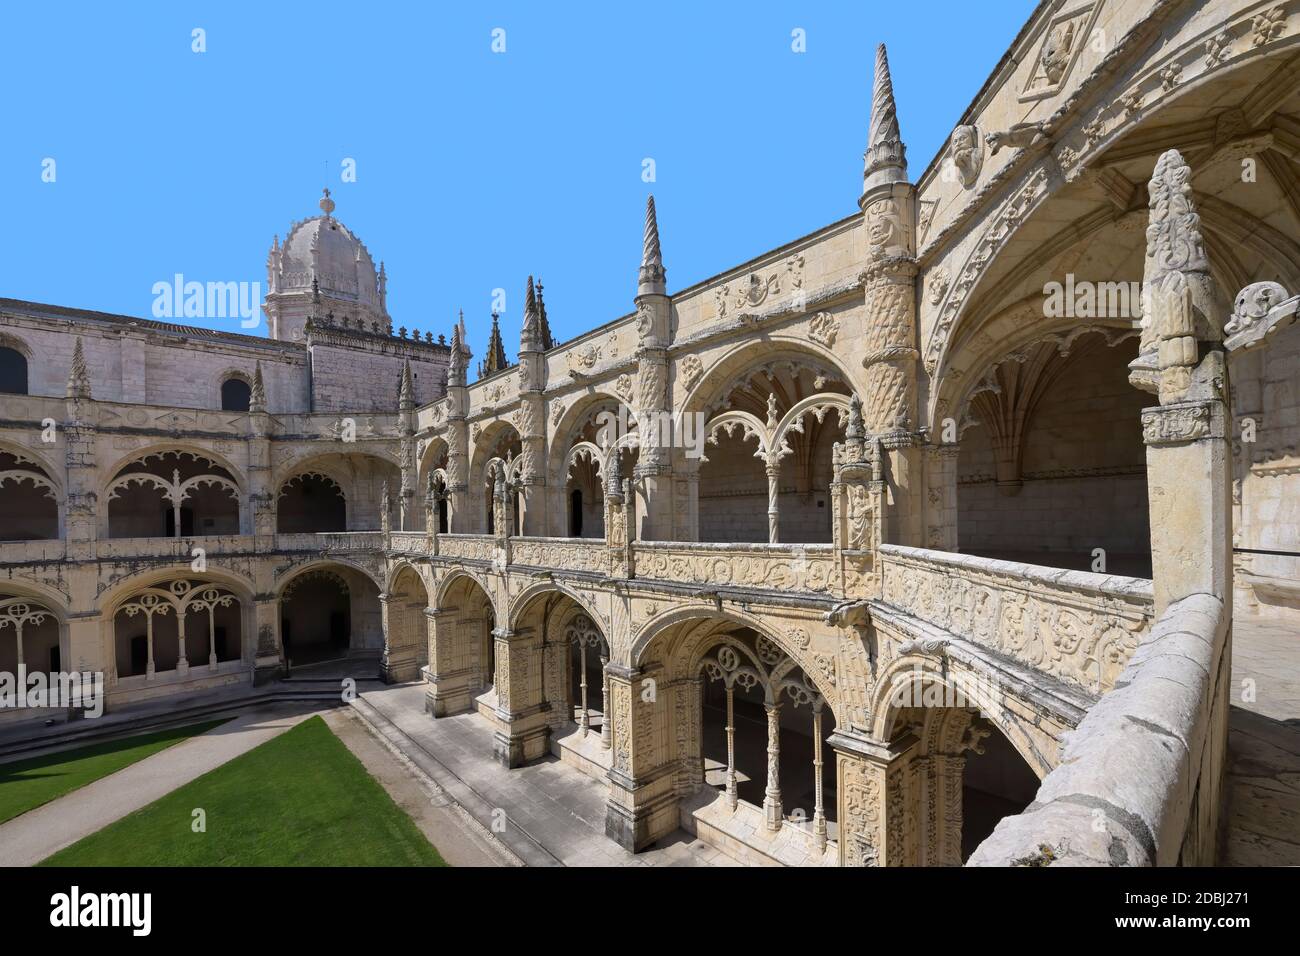 Courtyard in the Cloister, Monastery of the Hieronymites (Mosteiro dos Jeronimos), UNESCO World Heritage Site, Belem, Lisbon, Portugal, Europe Stock Photo